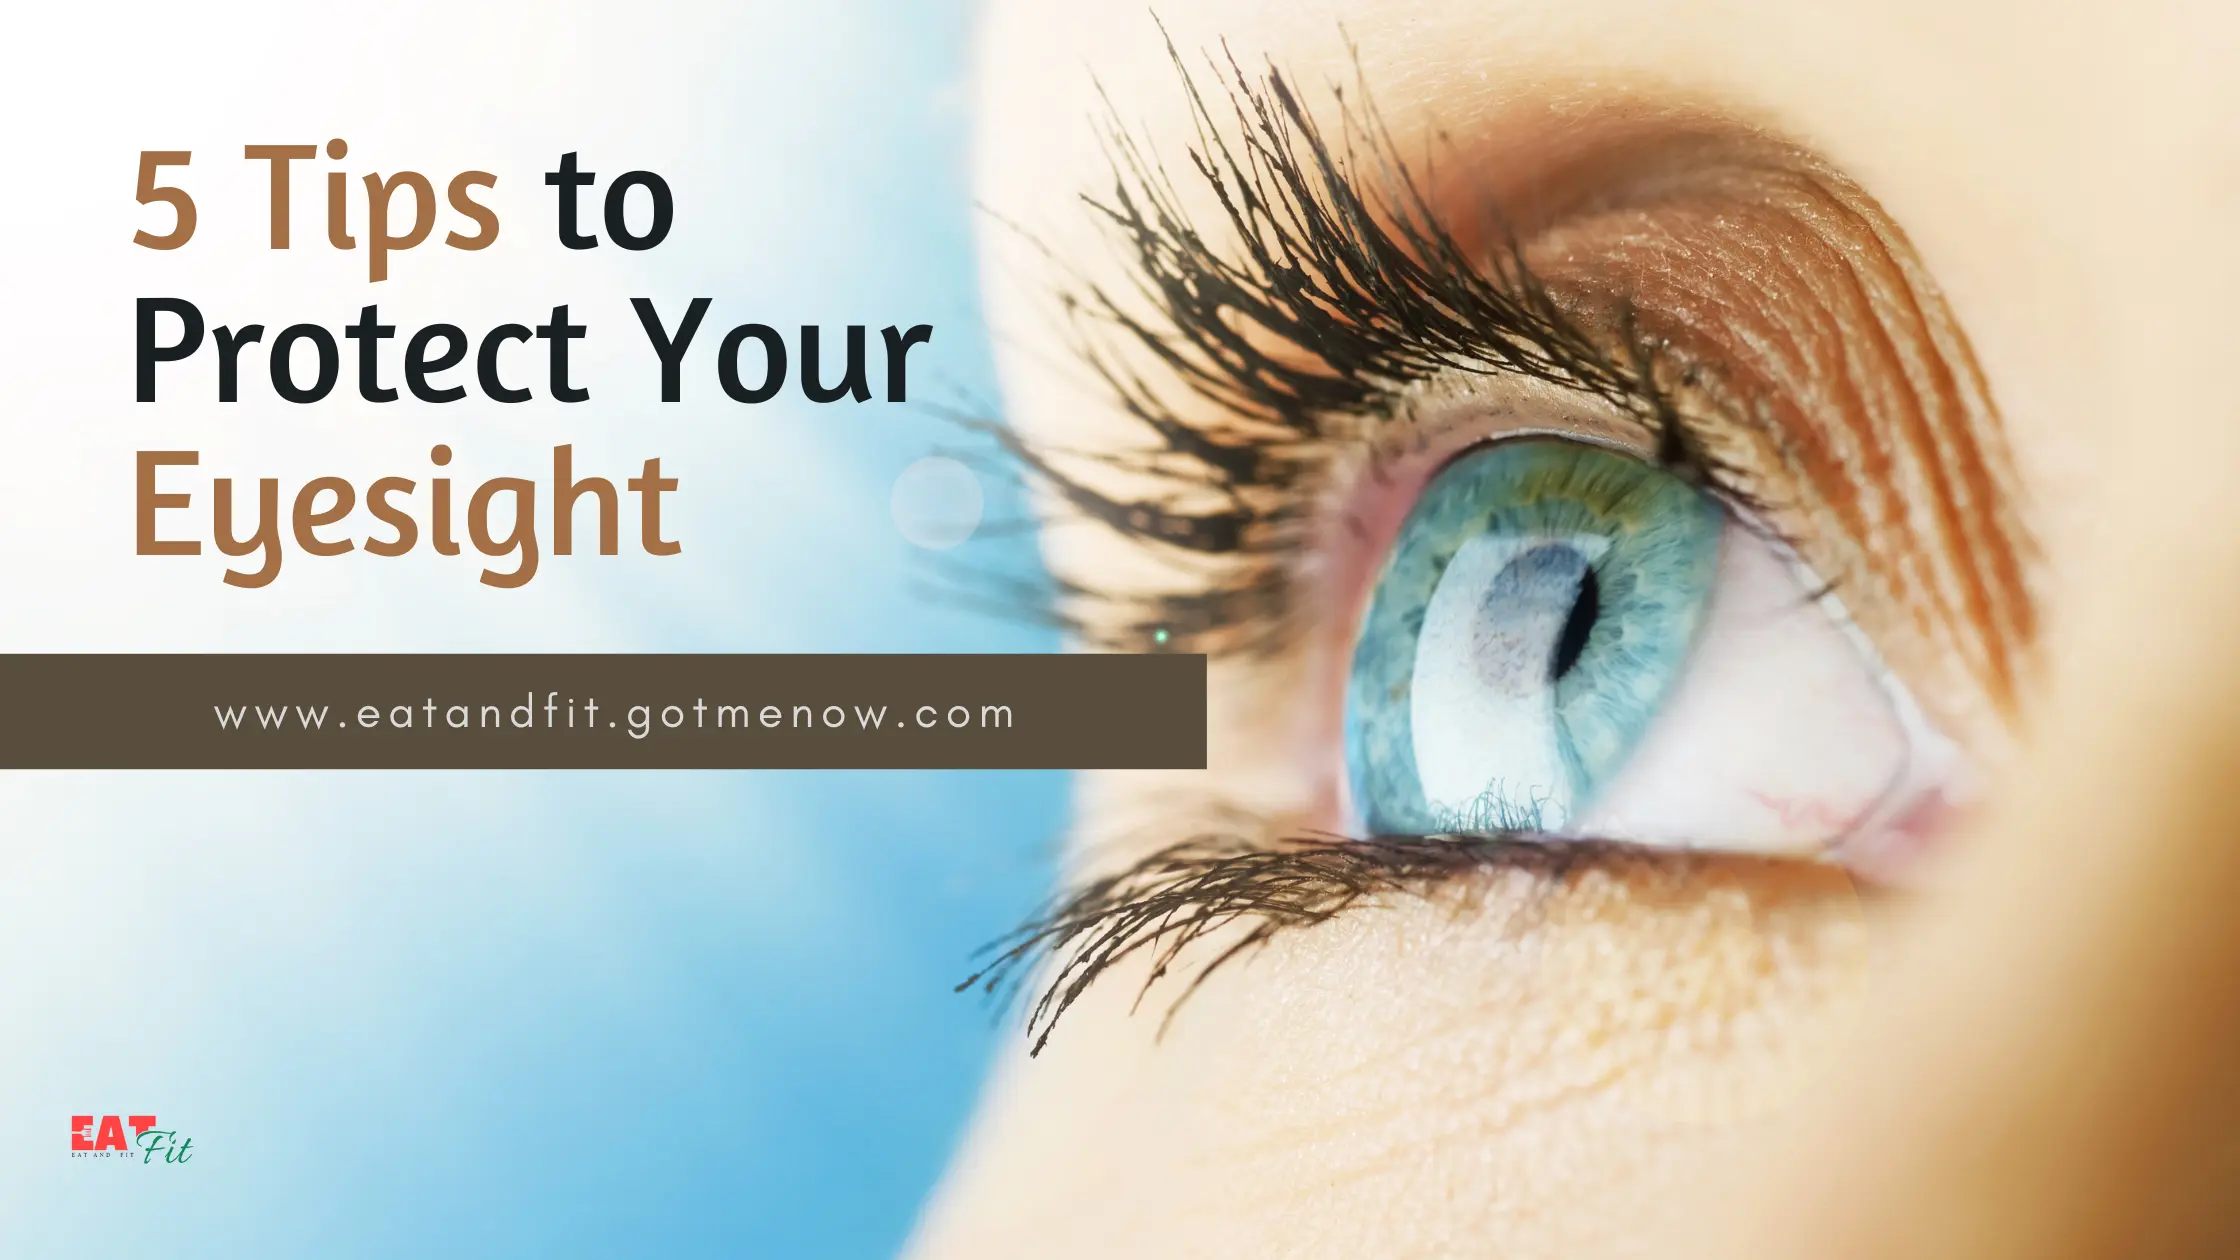 5 Proven Eye Health Tips for Preventing Vision Loss